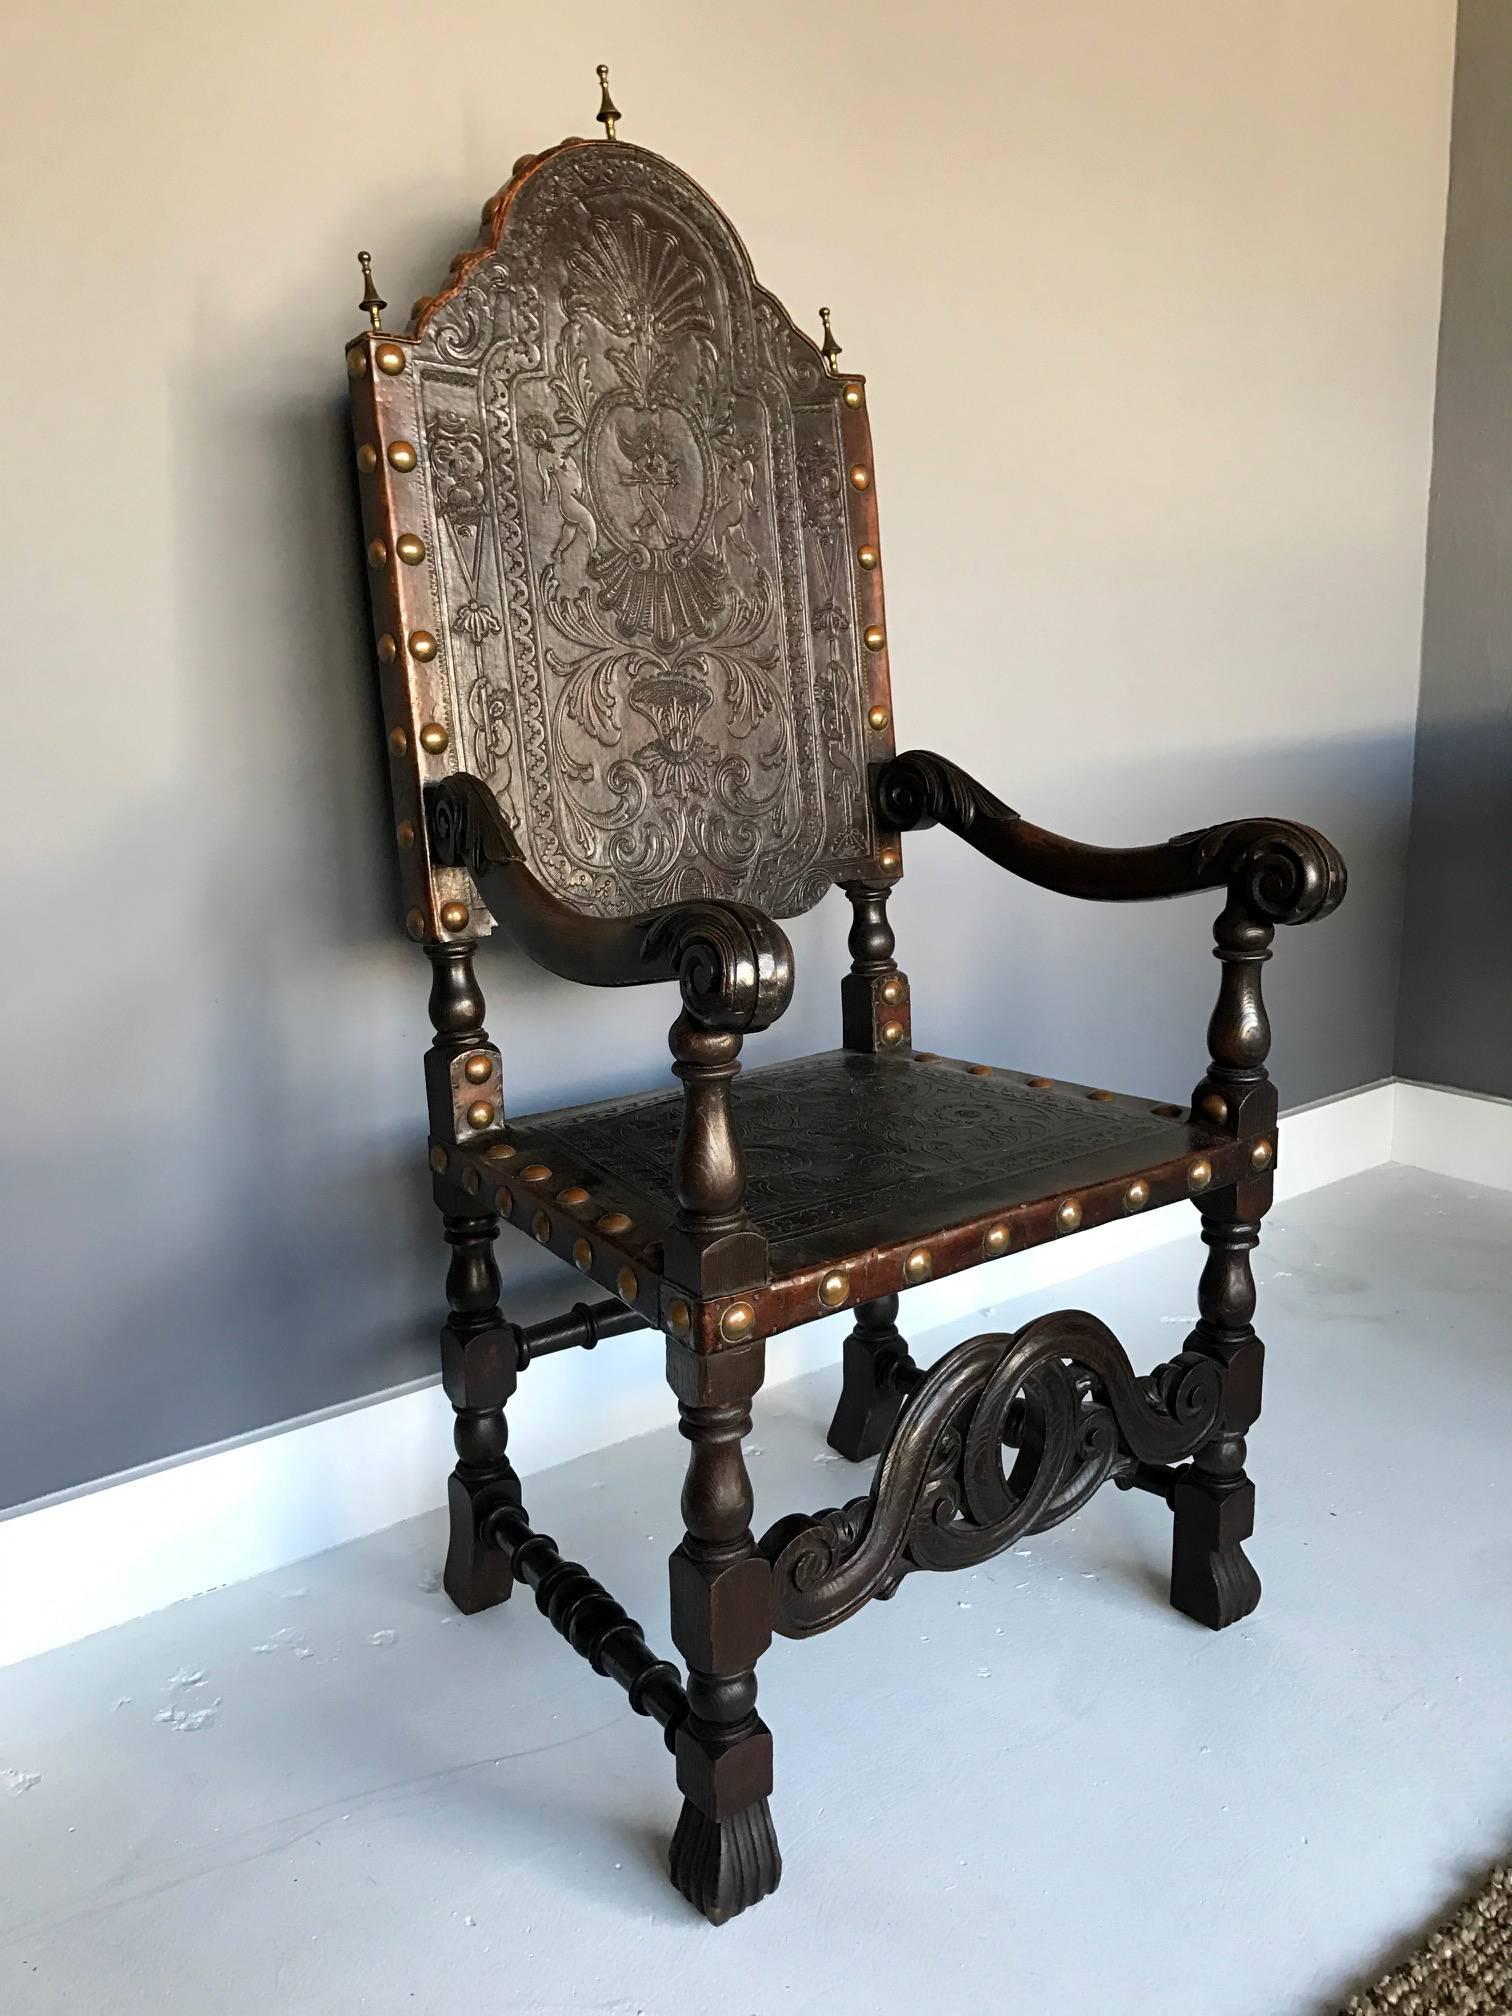 A beautiful Portuguese embossed leather armchair circa early 19th century. It features a shaped scalloped crest, scrolling acanthine arms, embossed leather back and seat with foliate, shell-form and figurative designs, bronze finials and large tacks.